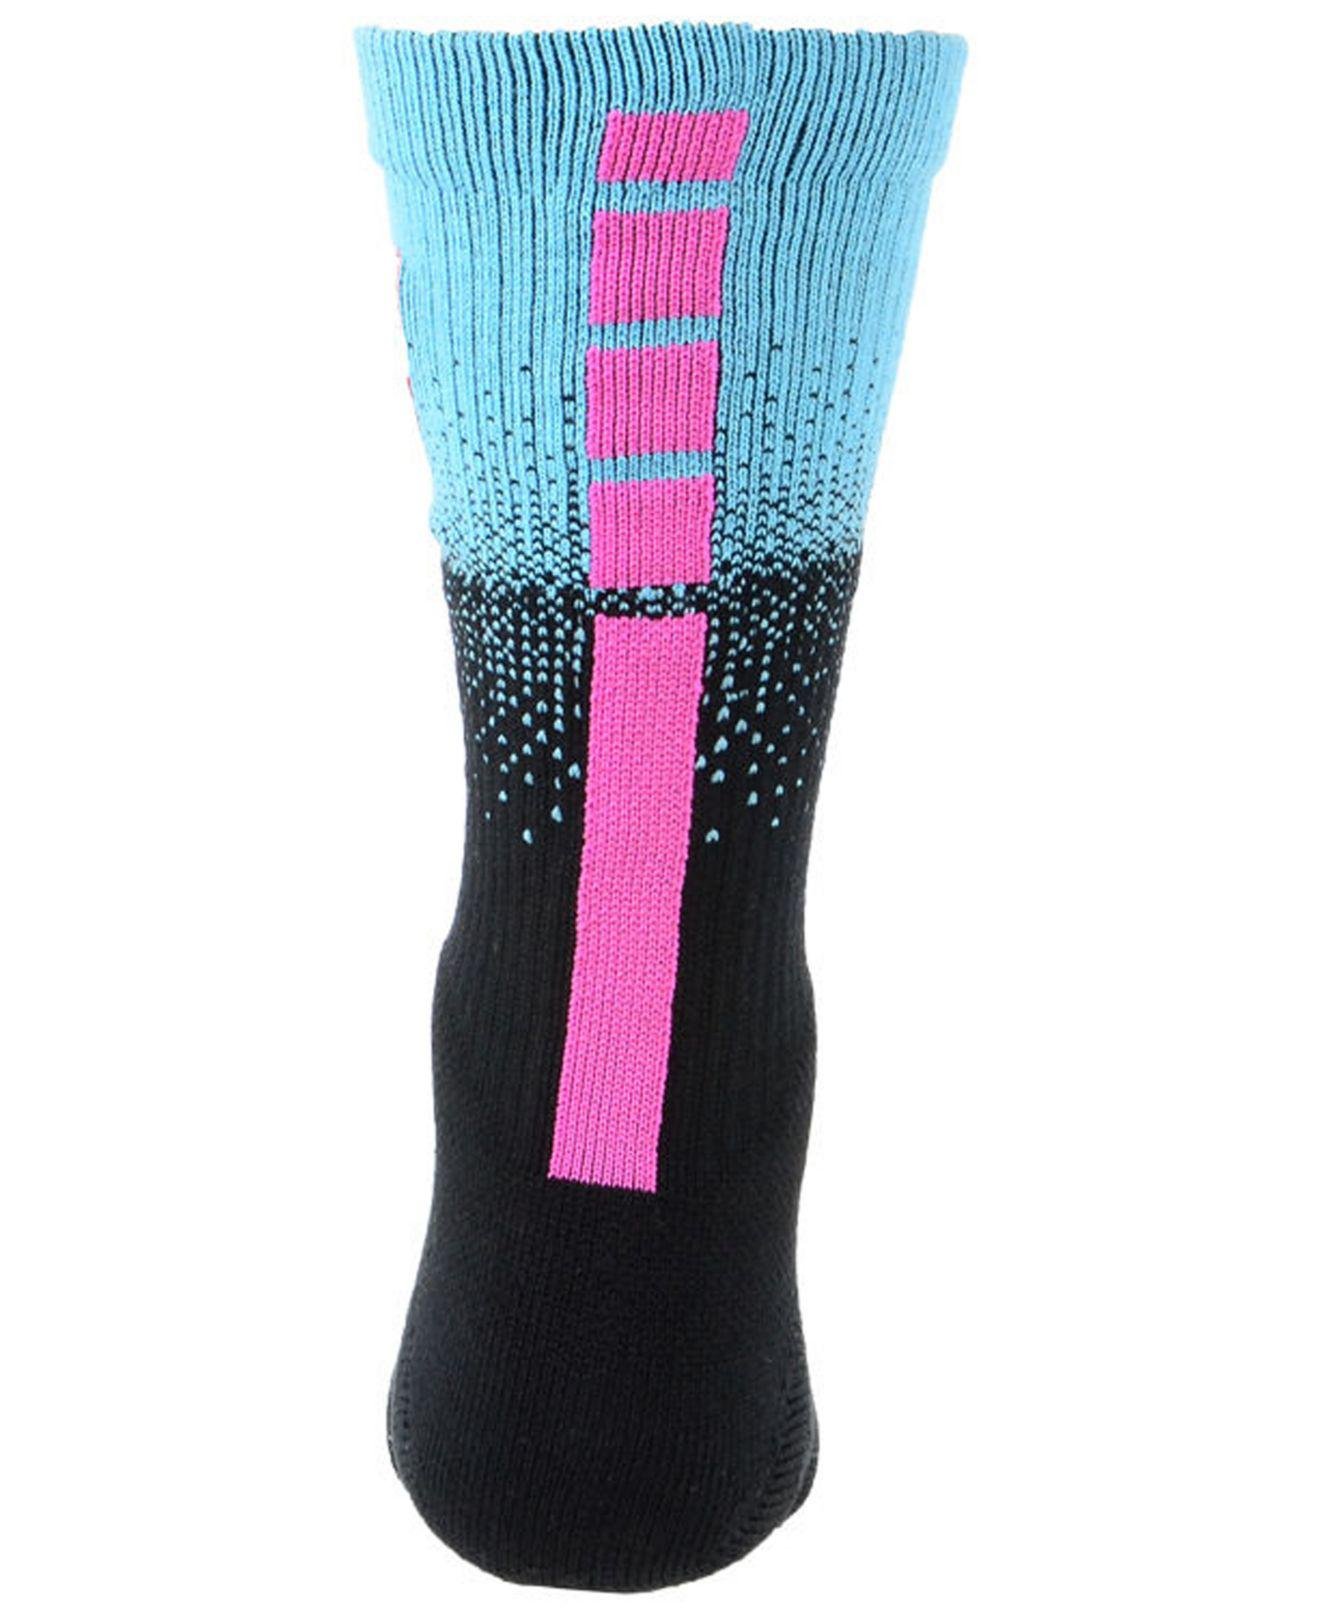 Nike Synthetic Miami Heat City Edition Elite Crew Socks in Black/Blue/Pink  (Blue) for Men - Lyst